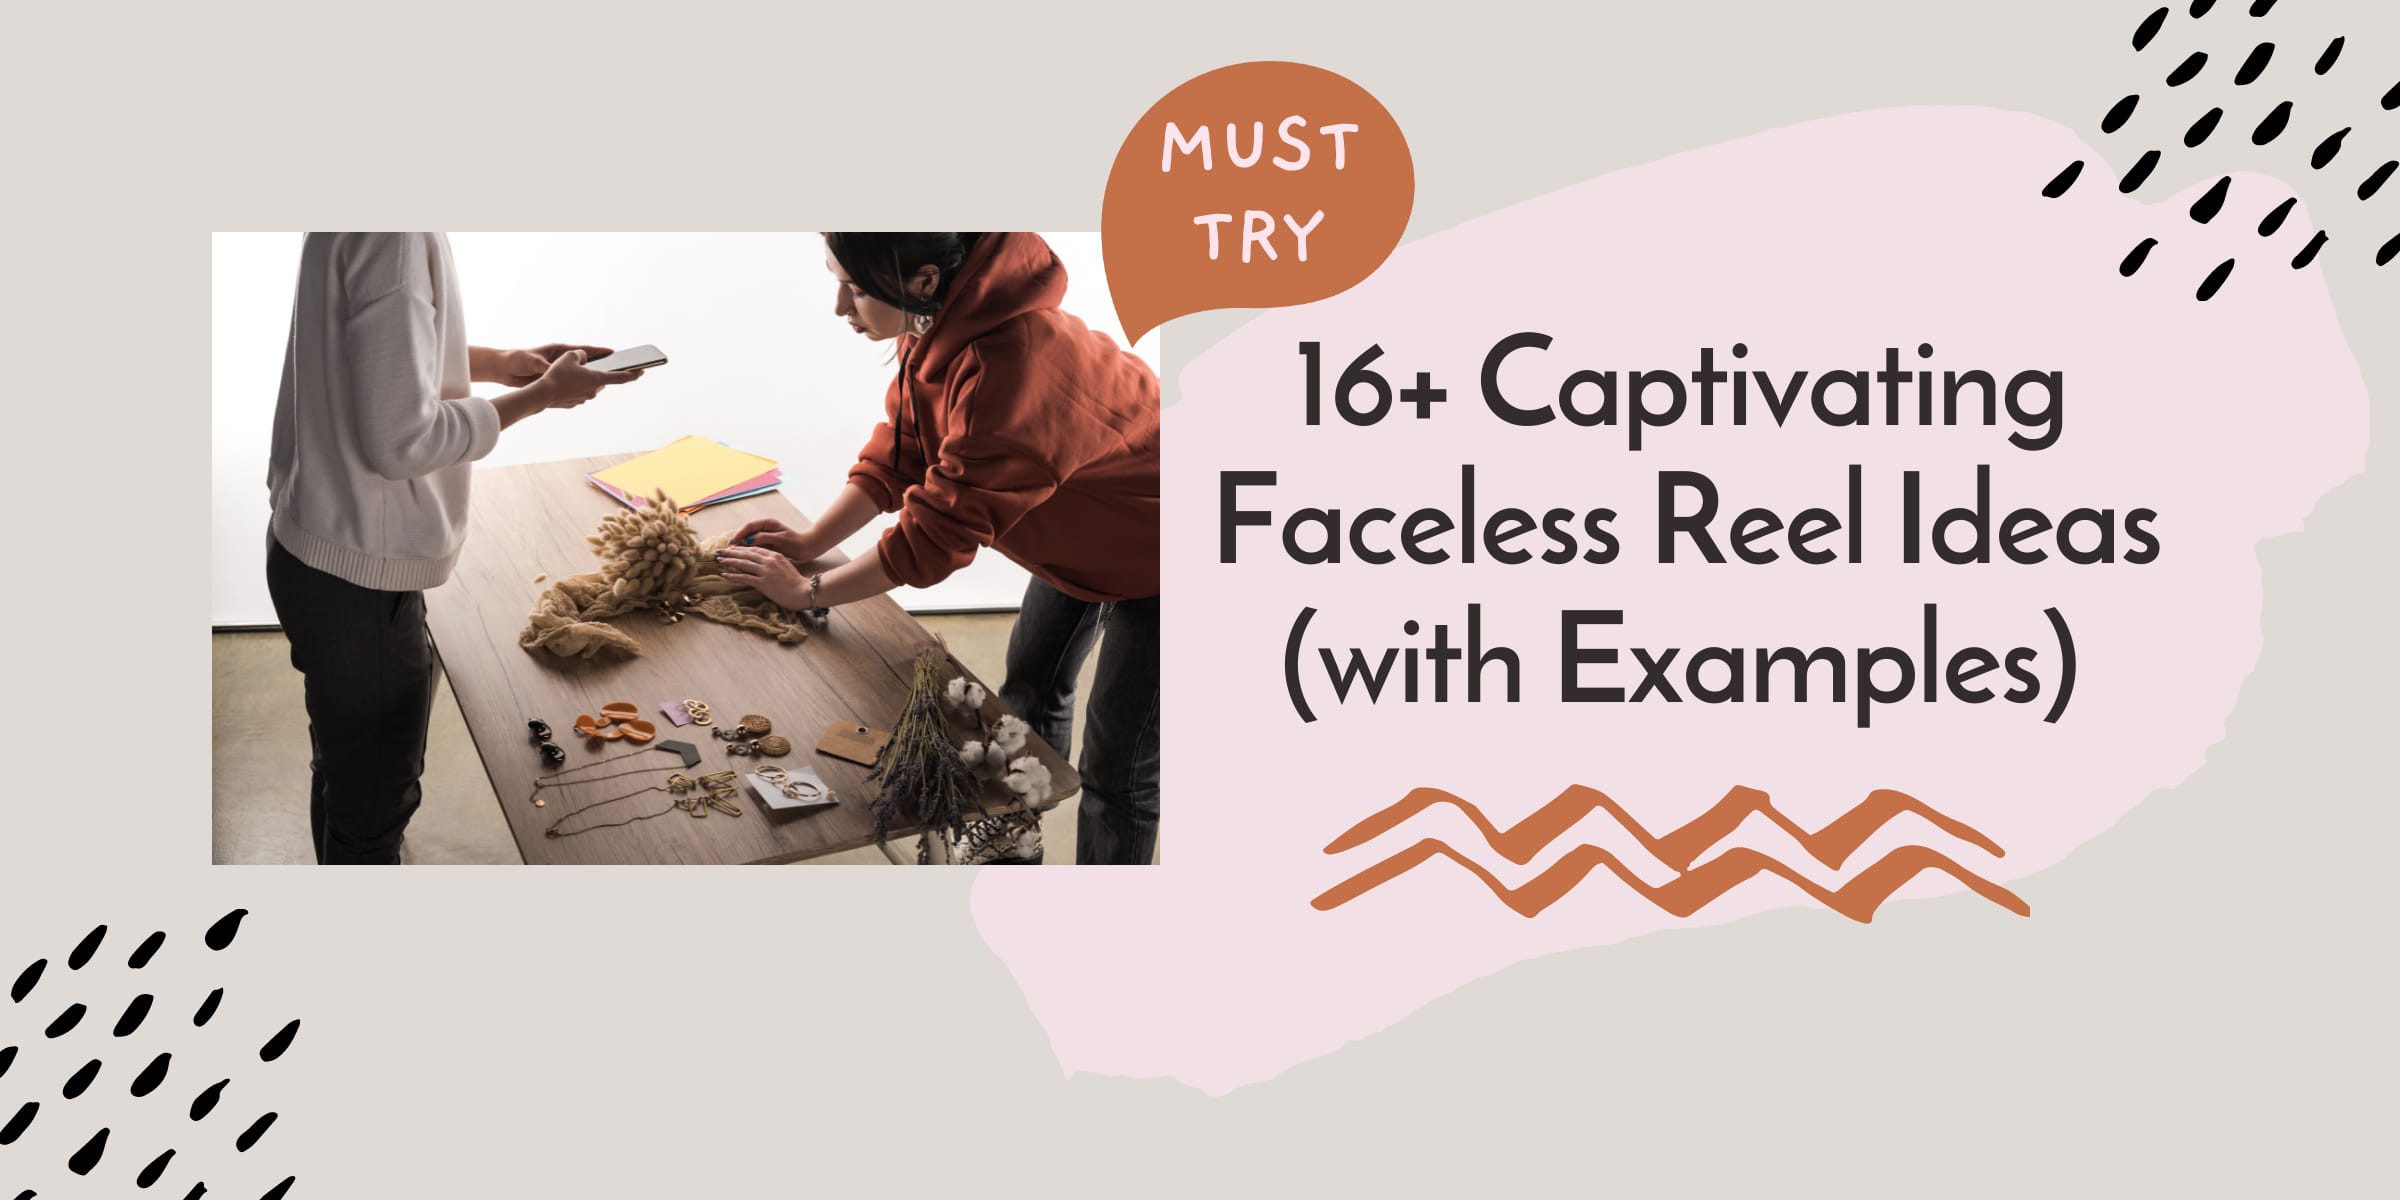 MUST TRY 16 Captivating Faceless Reel Ideas